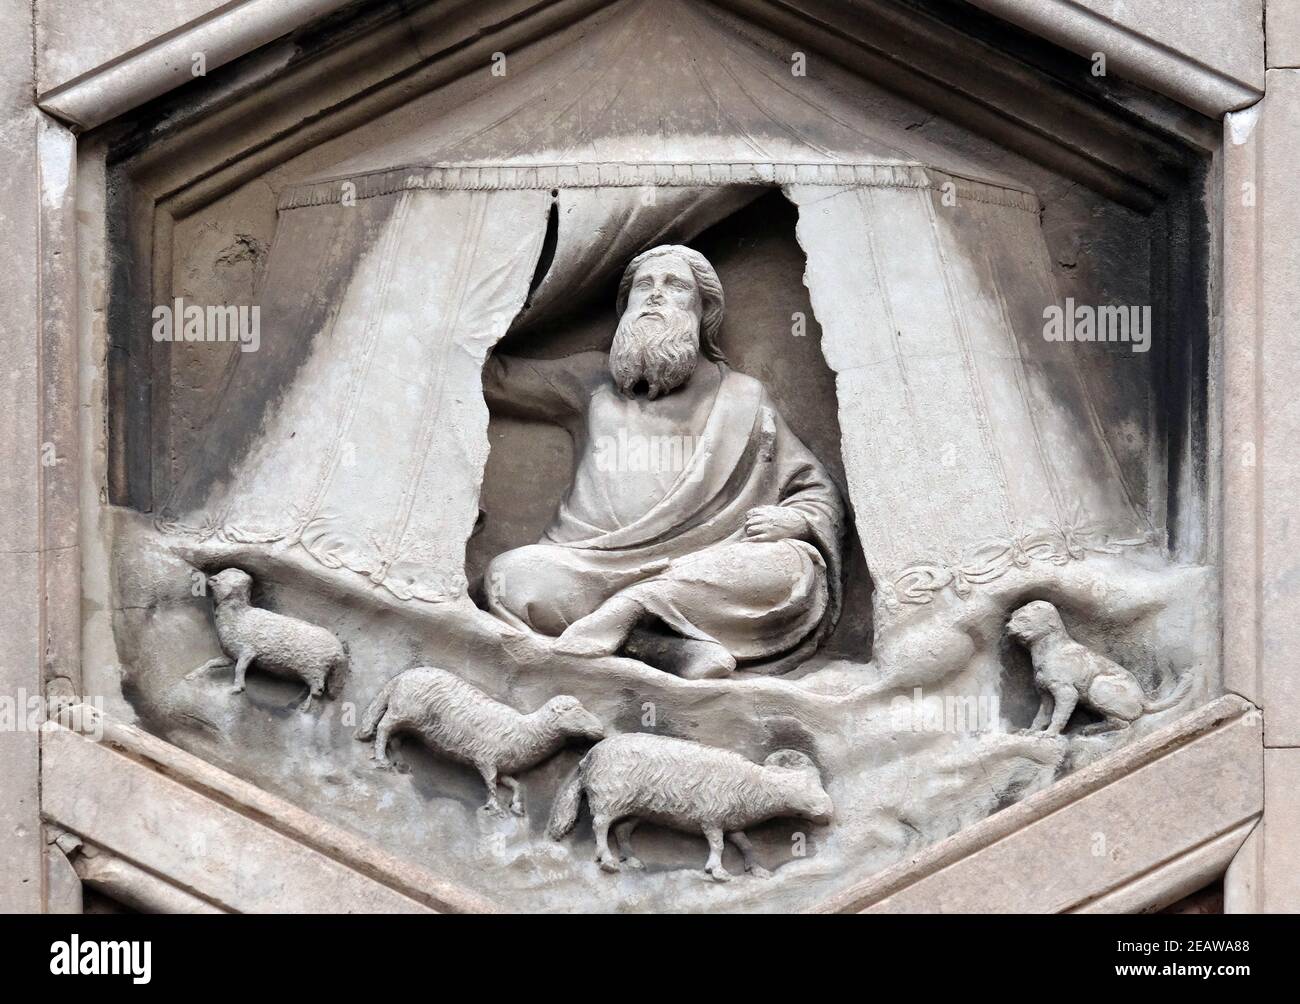 Jabal by Nino Pisano, 1334-36., Relief on Giotto Campanile of Cattedrale di Santa Maria del Fiore (Cathedral of Saint Mary of the Flower), Florence, Italy Stock Photo